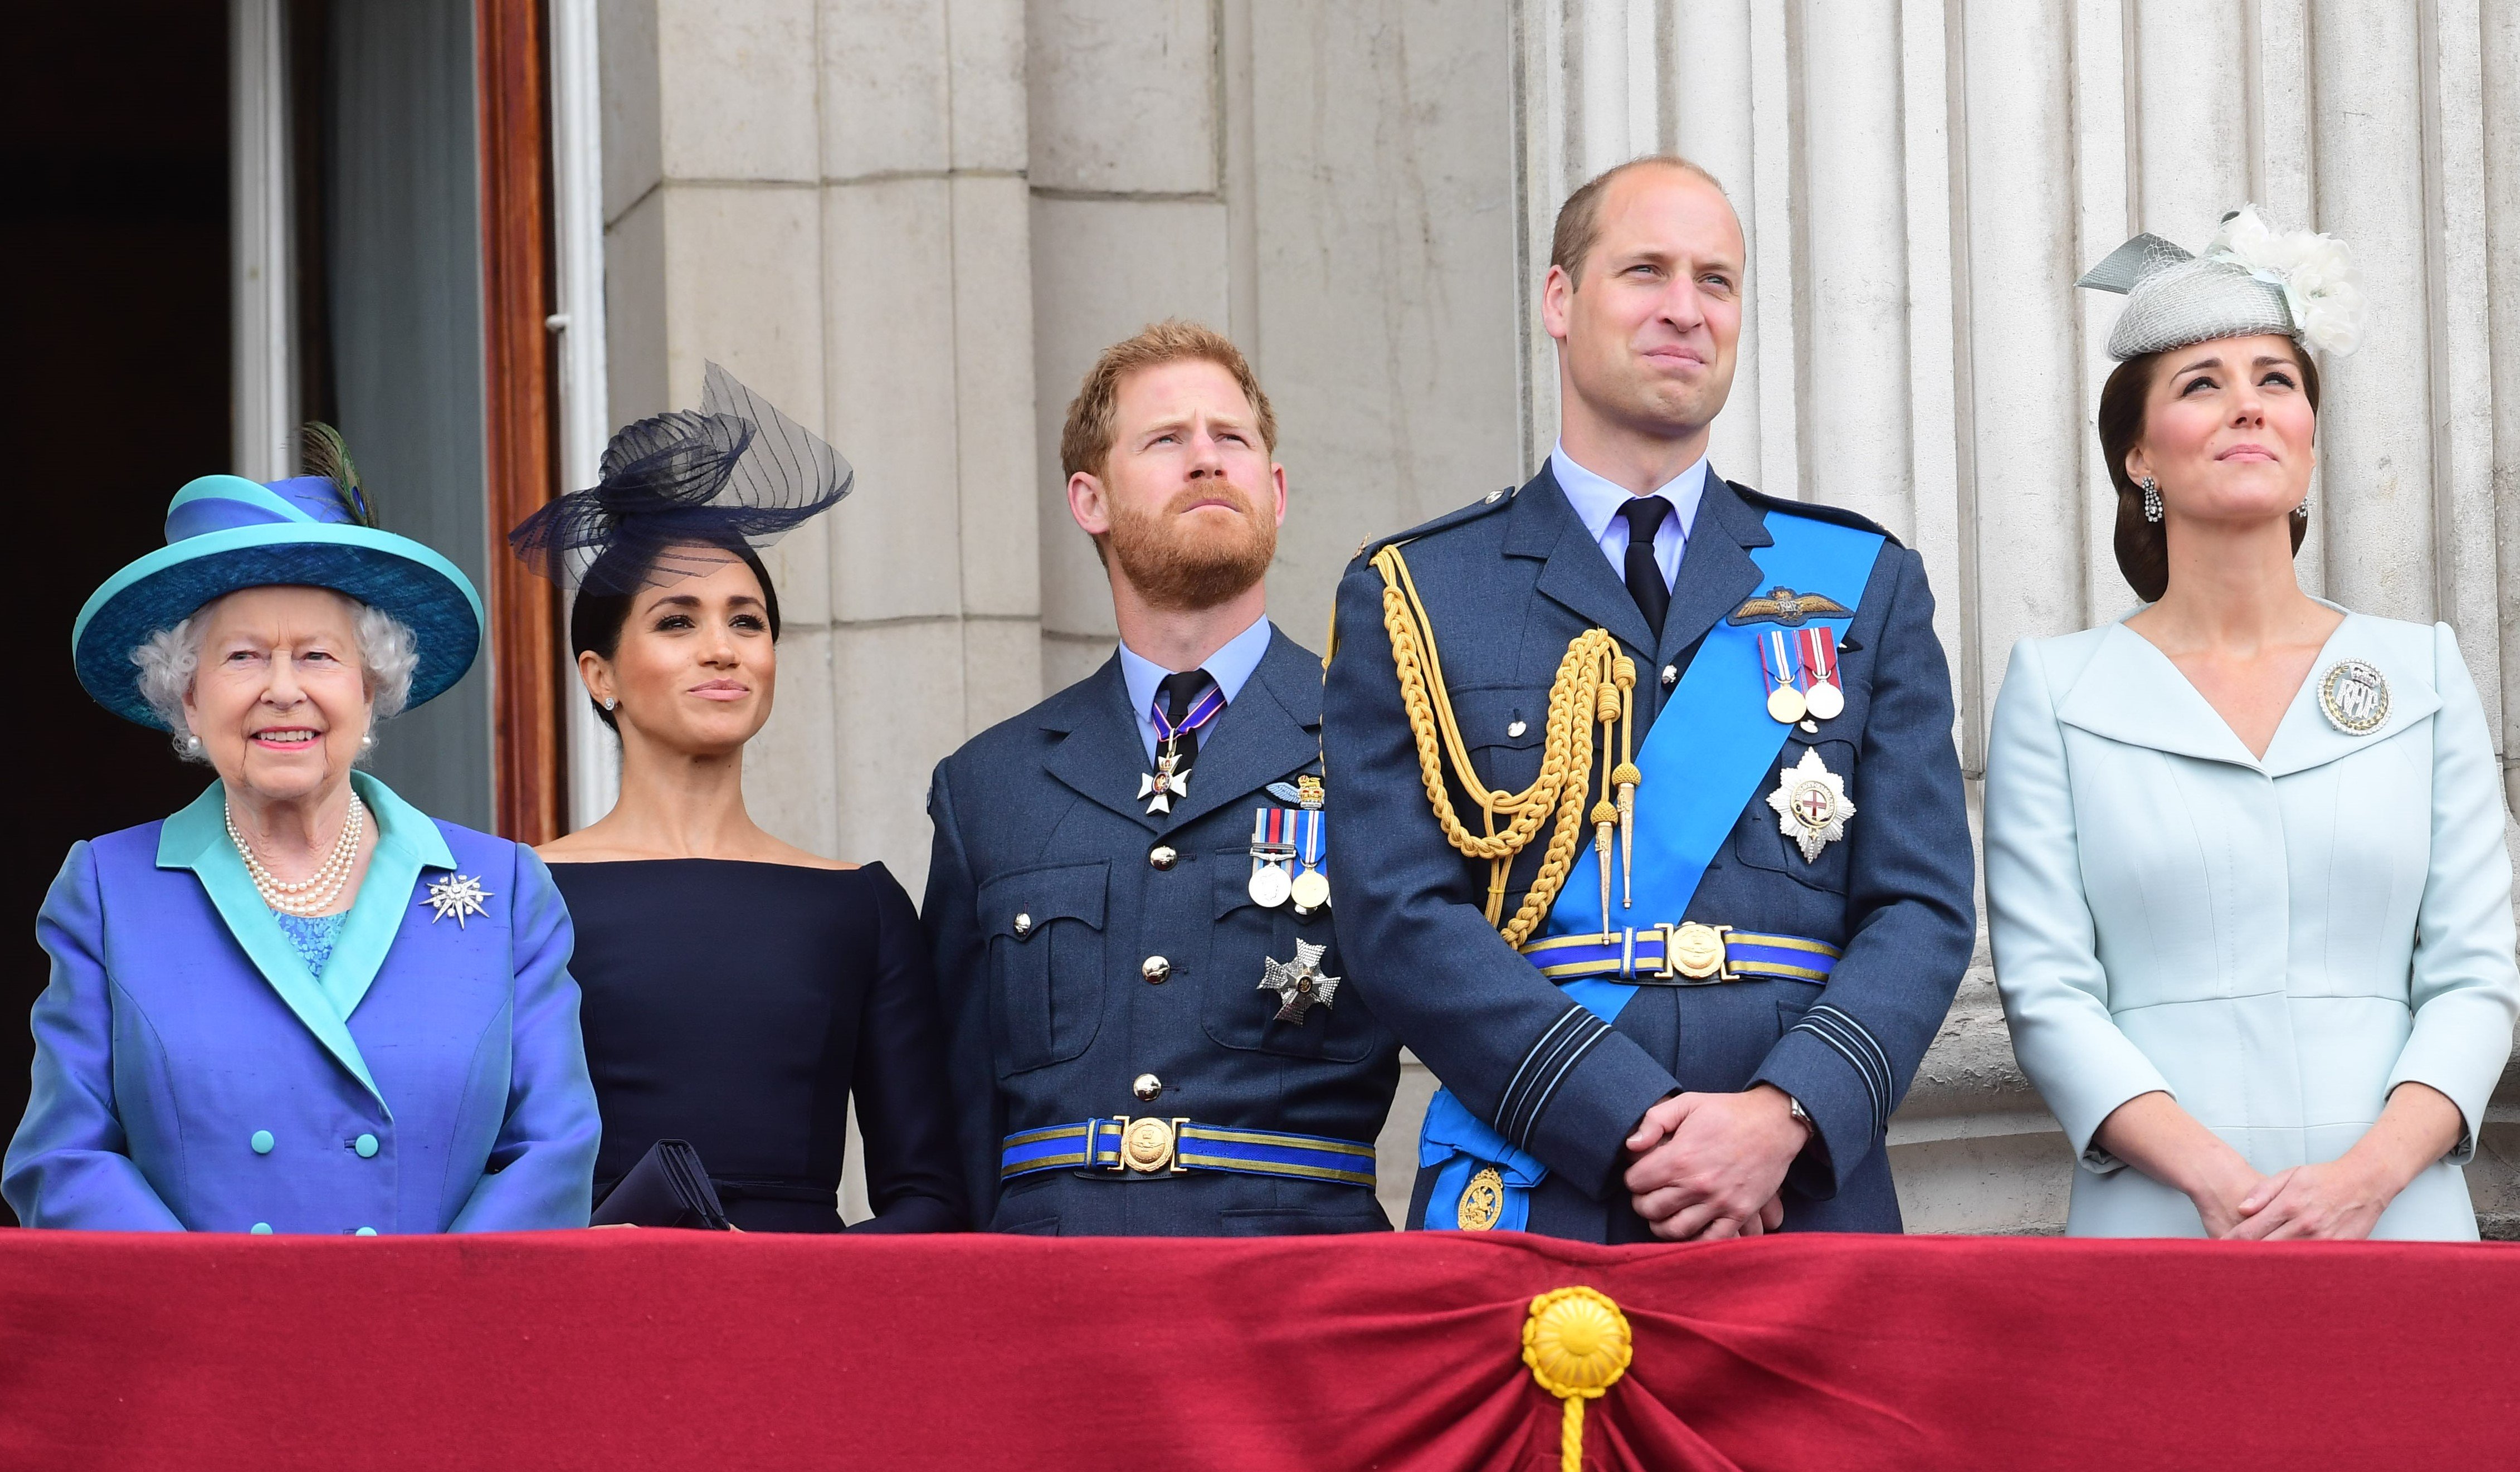 (L to R): Queen Elizabeth II, Meghan Markle, Prince Harry, Prince William, and Kate Middleton watching a flypast on the royal balcony